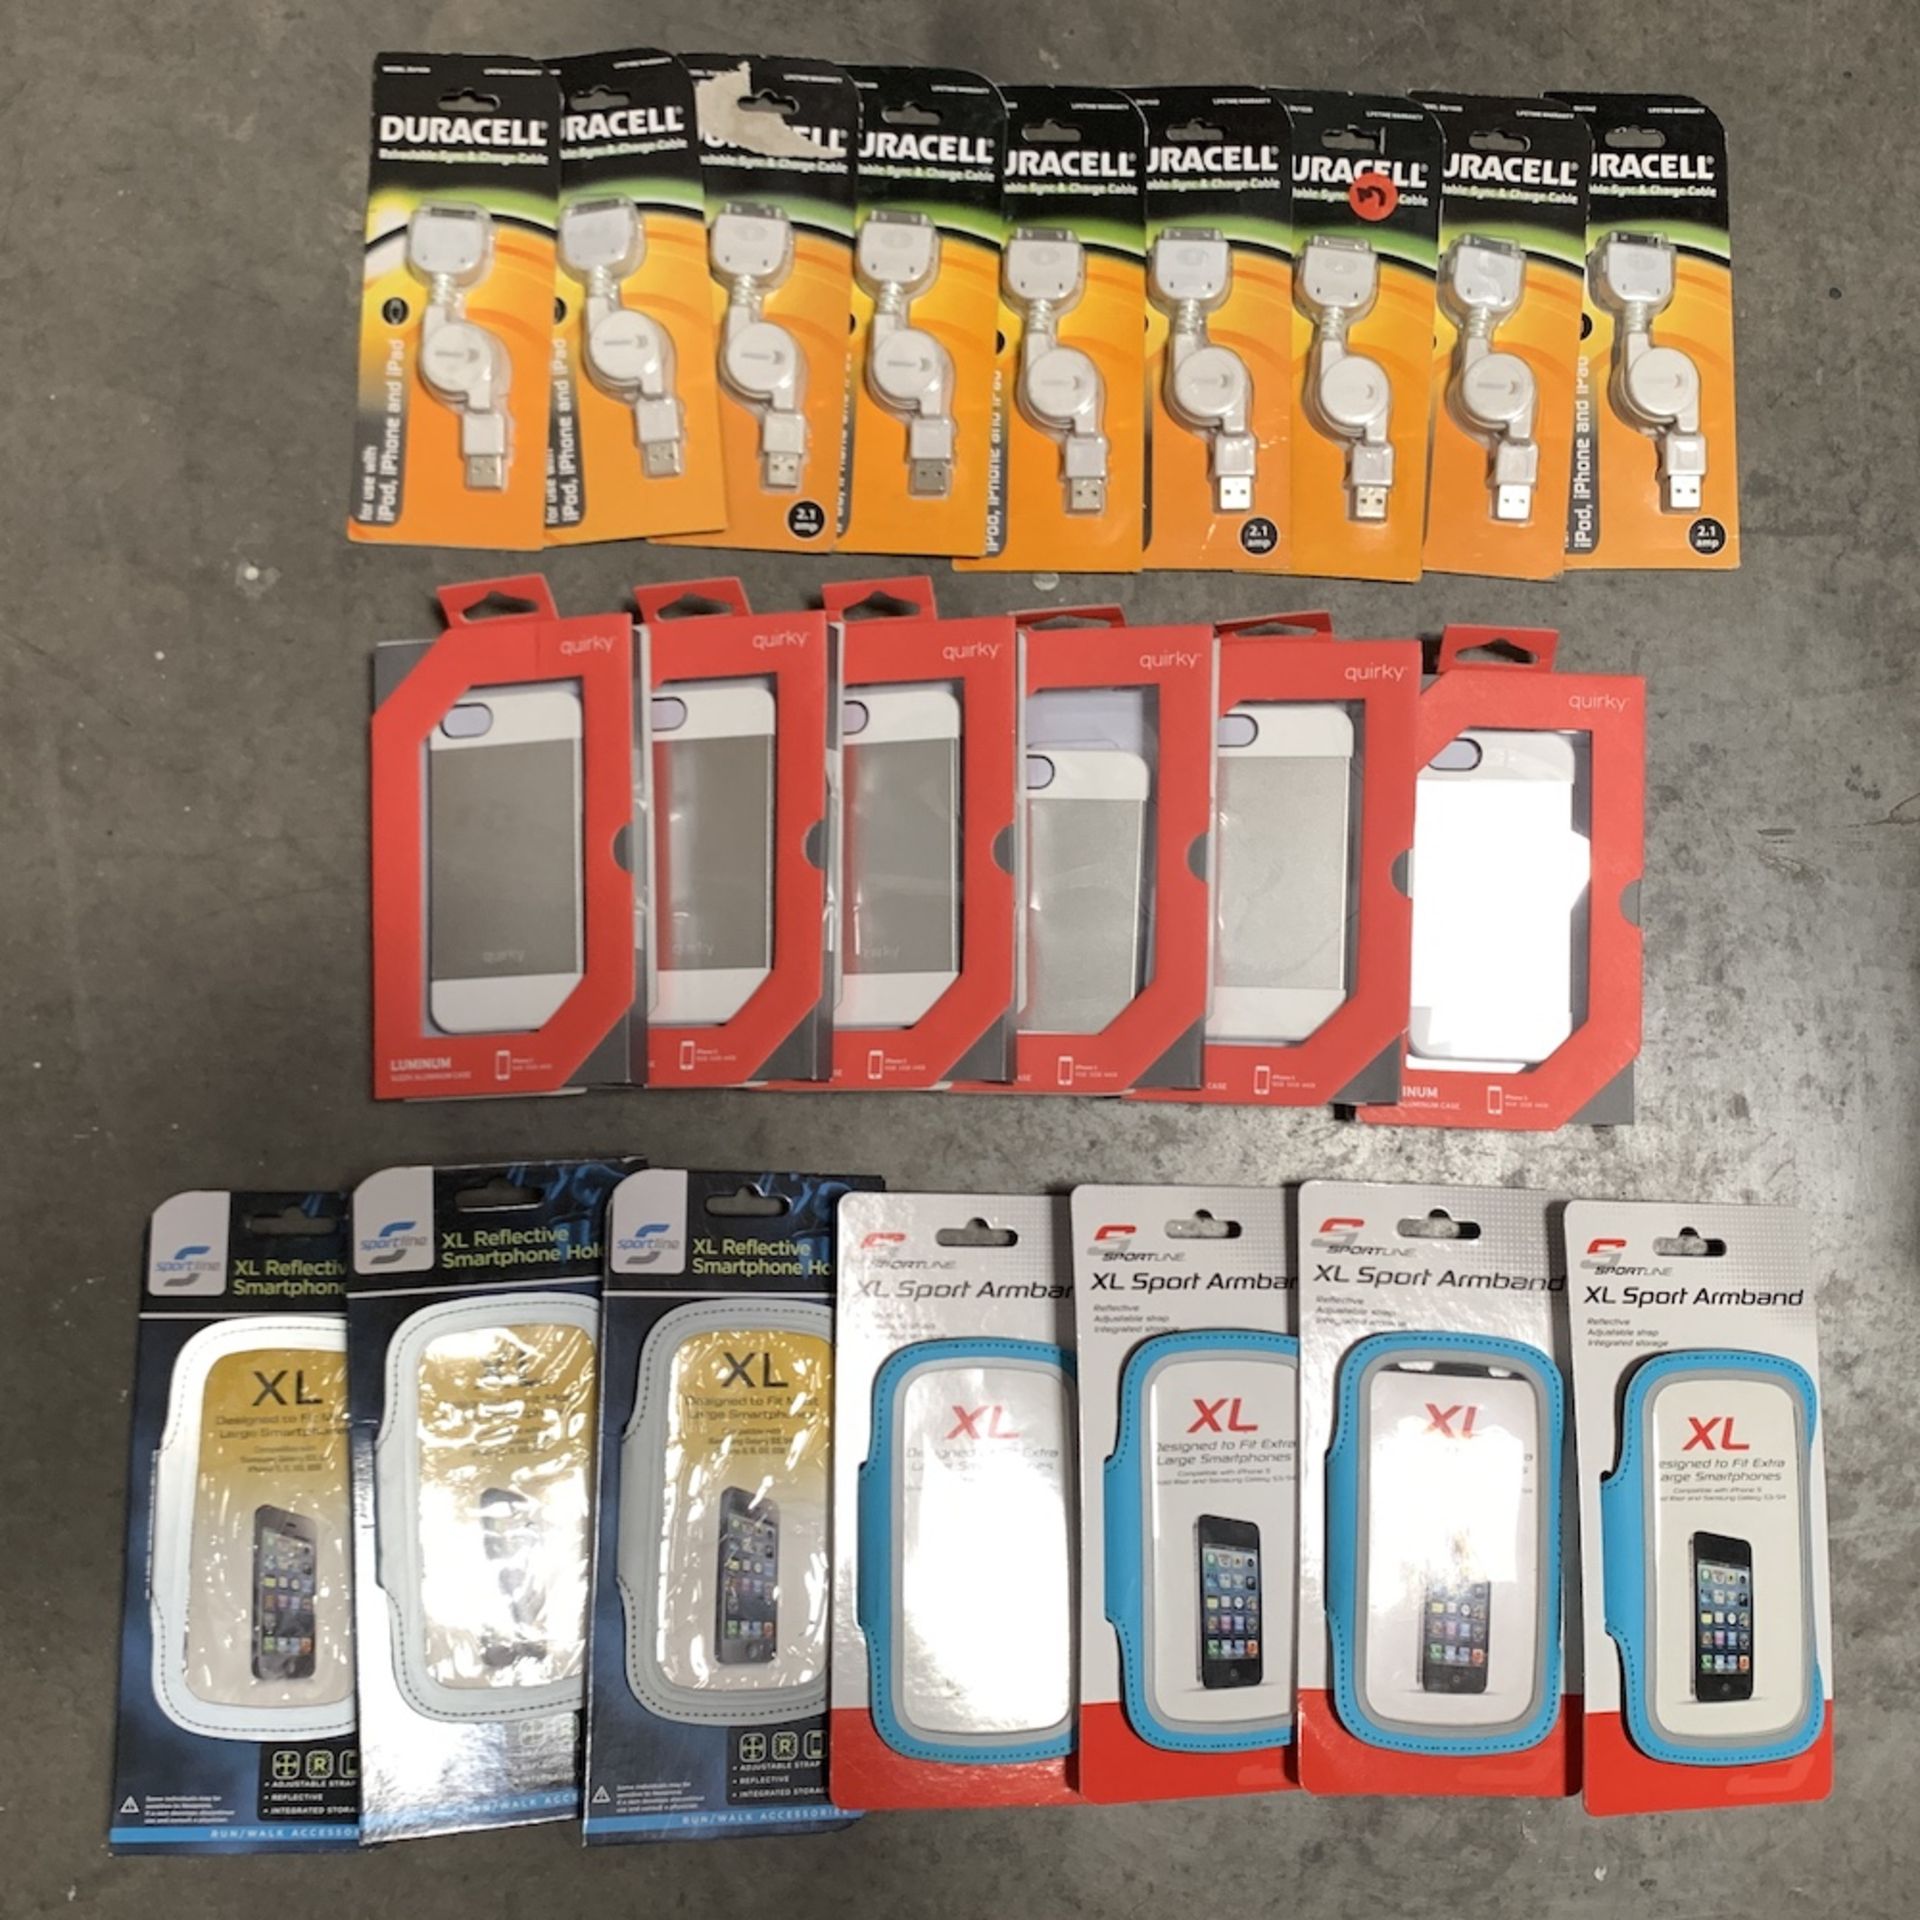 Lot of 22 iPhone Cases, Chargers, and Phone Armband Accessories - Image 2 of 4